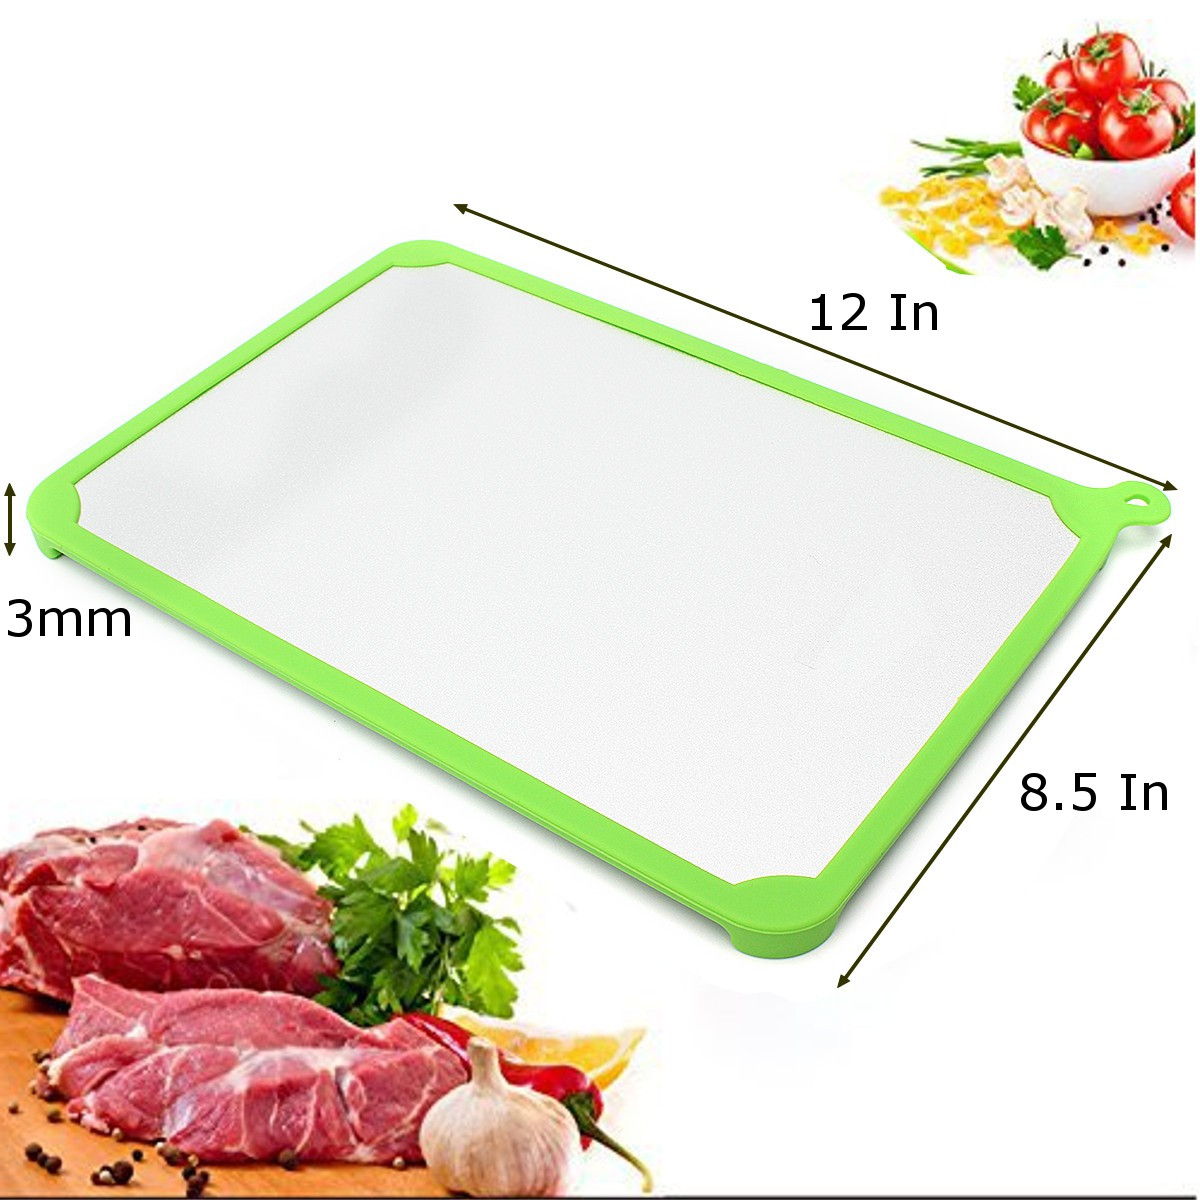 Kitchen-Green-Defrosting-Tray-Thaw-Frozen-Food-Plate-Quick-Time-Safe-Defrost-Anti-bacteria-1125942